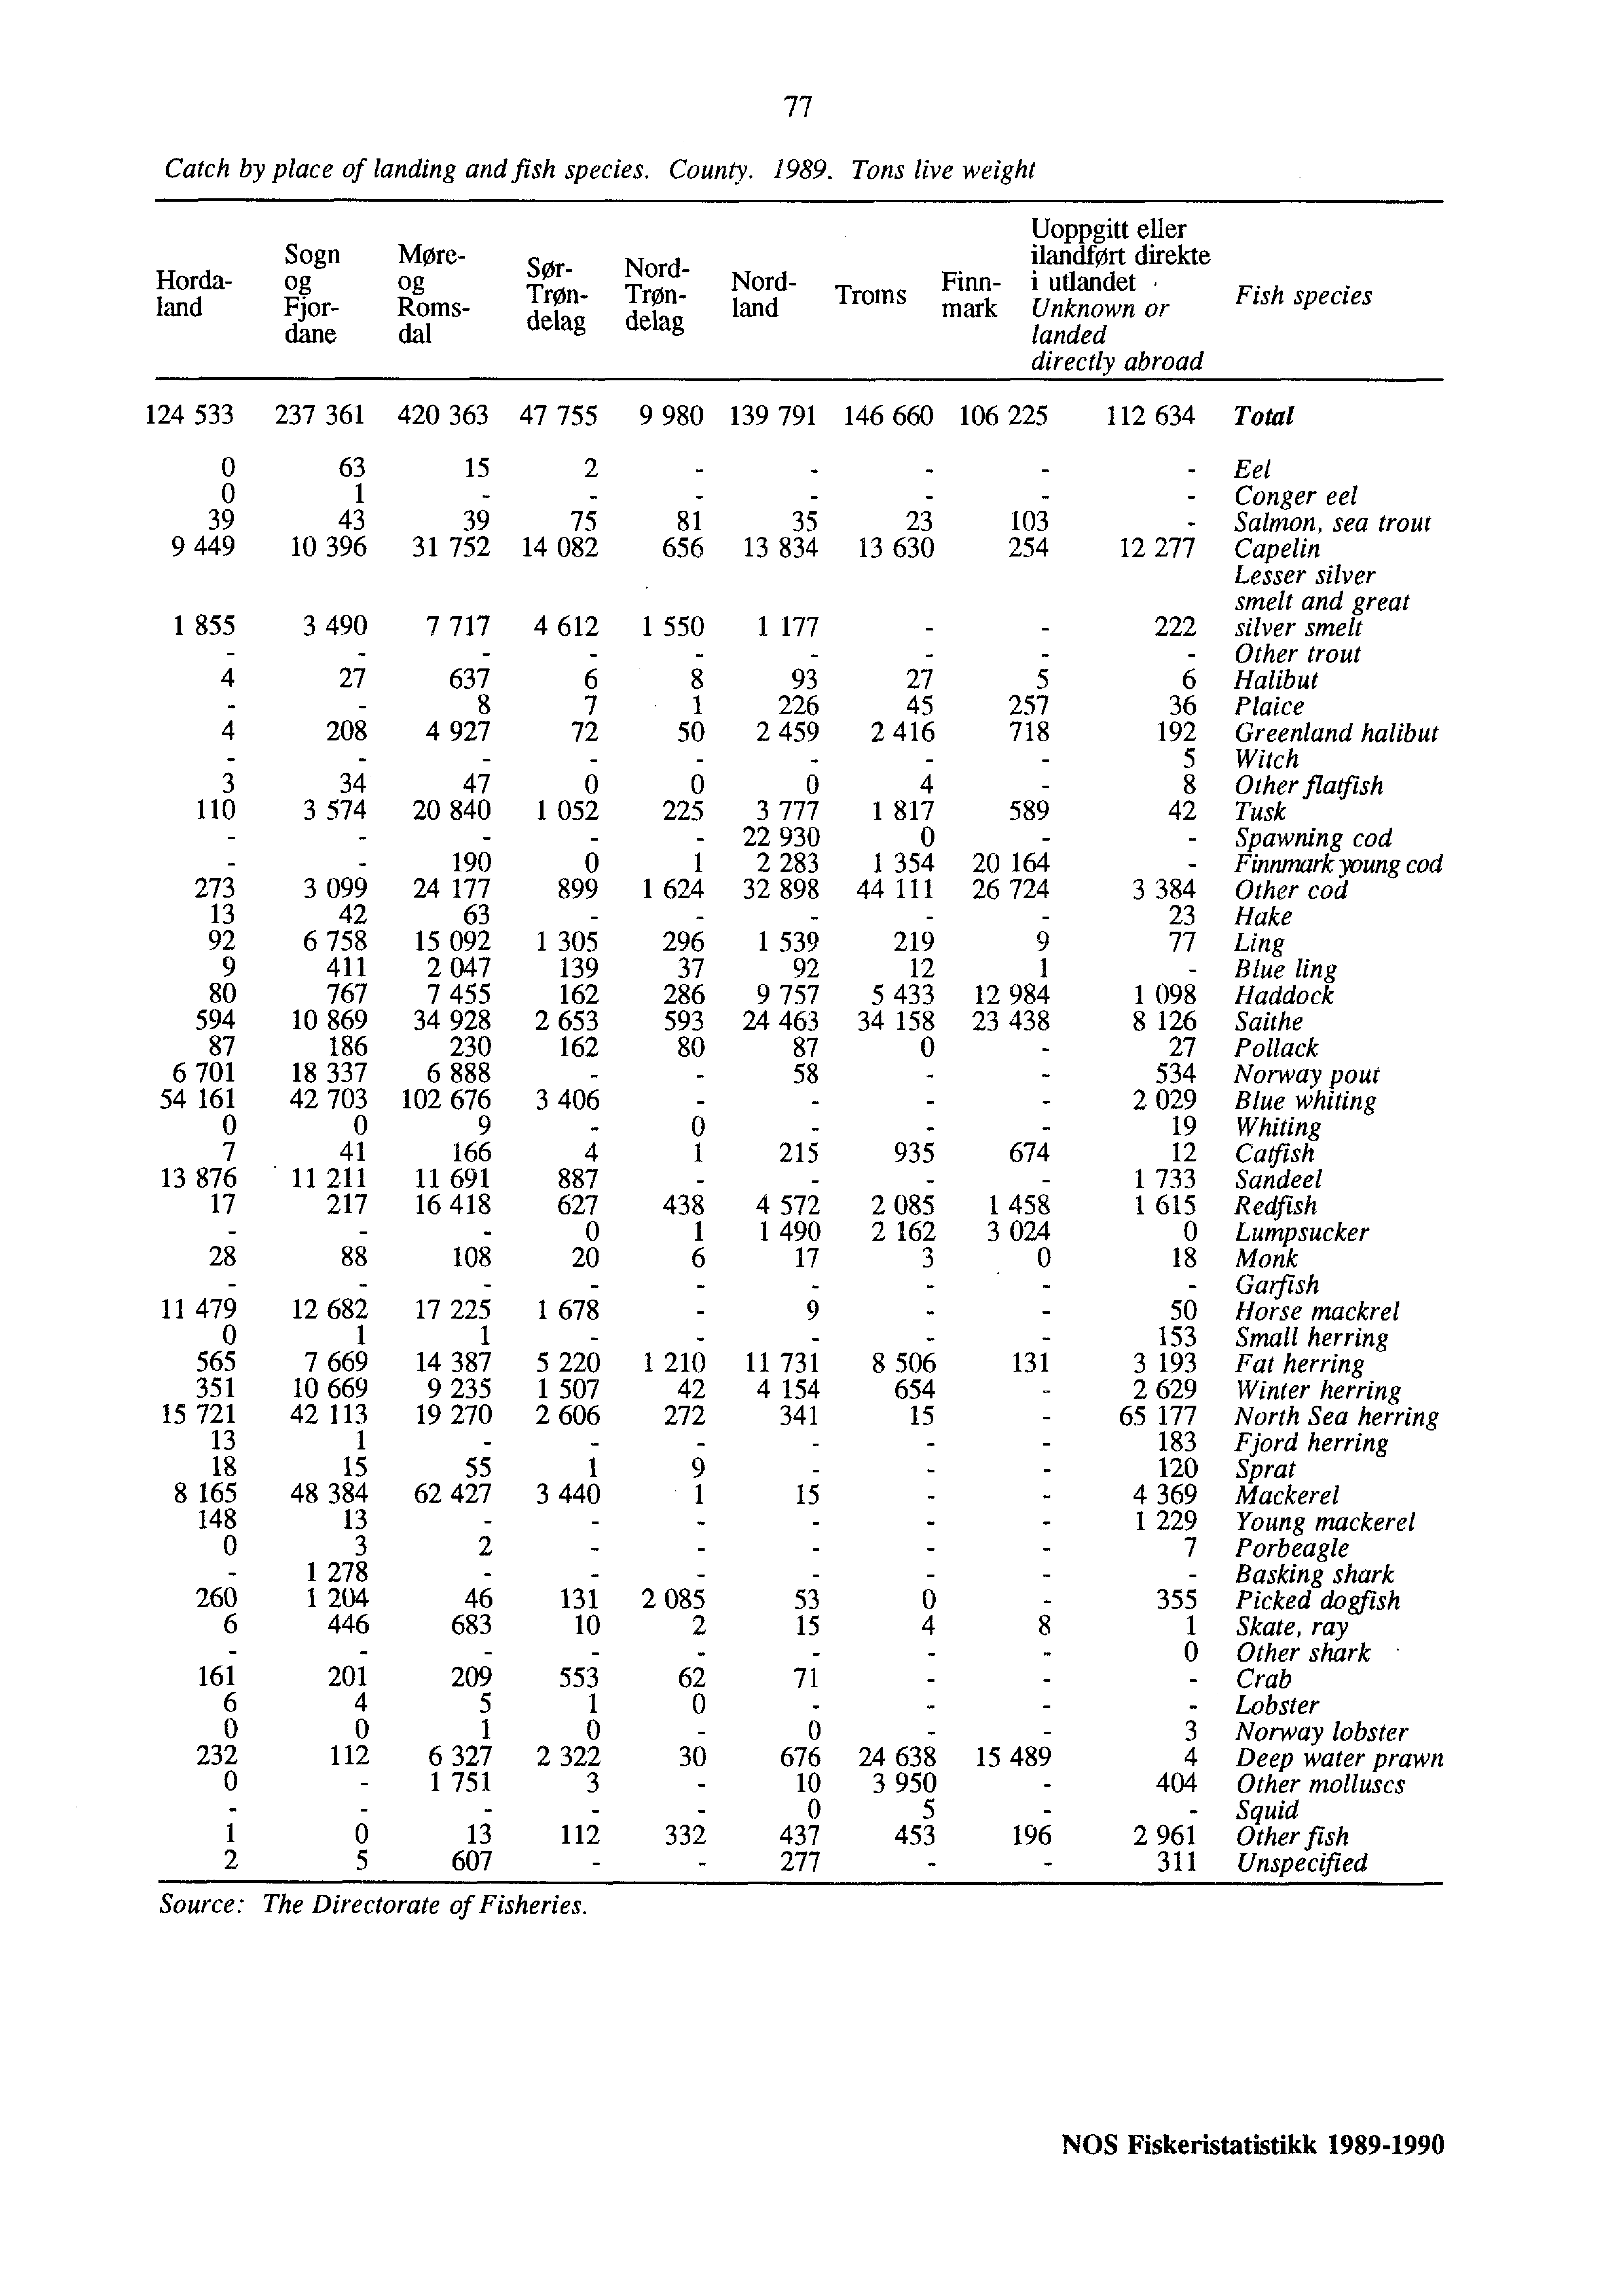 Catch by place of landing and fish species. County. 1989.